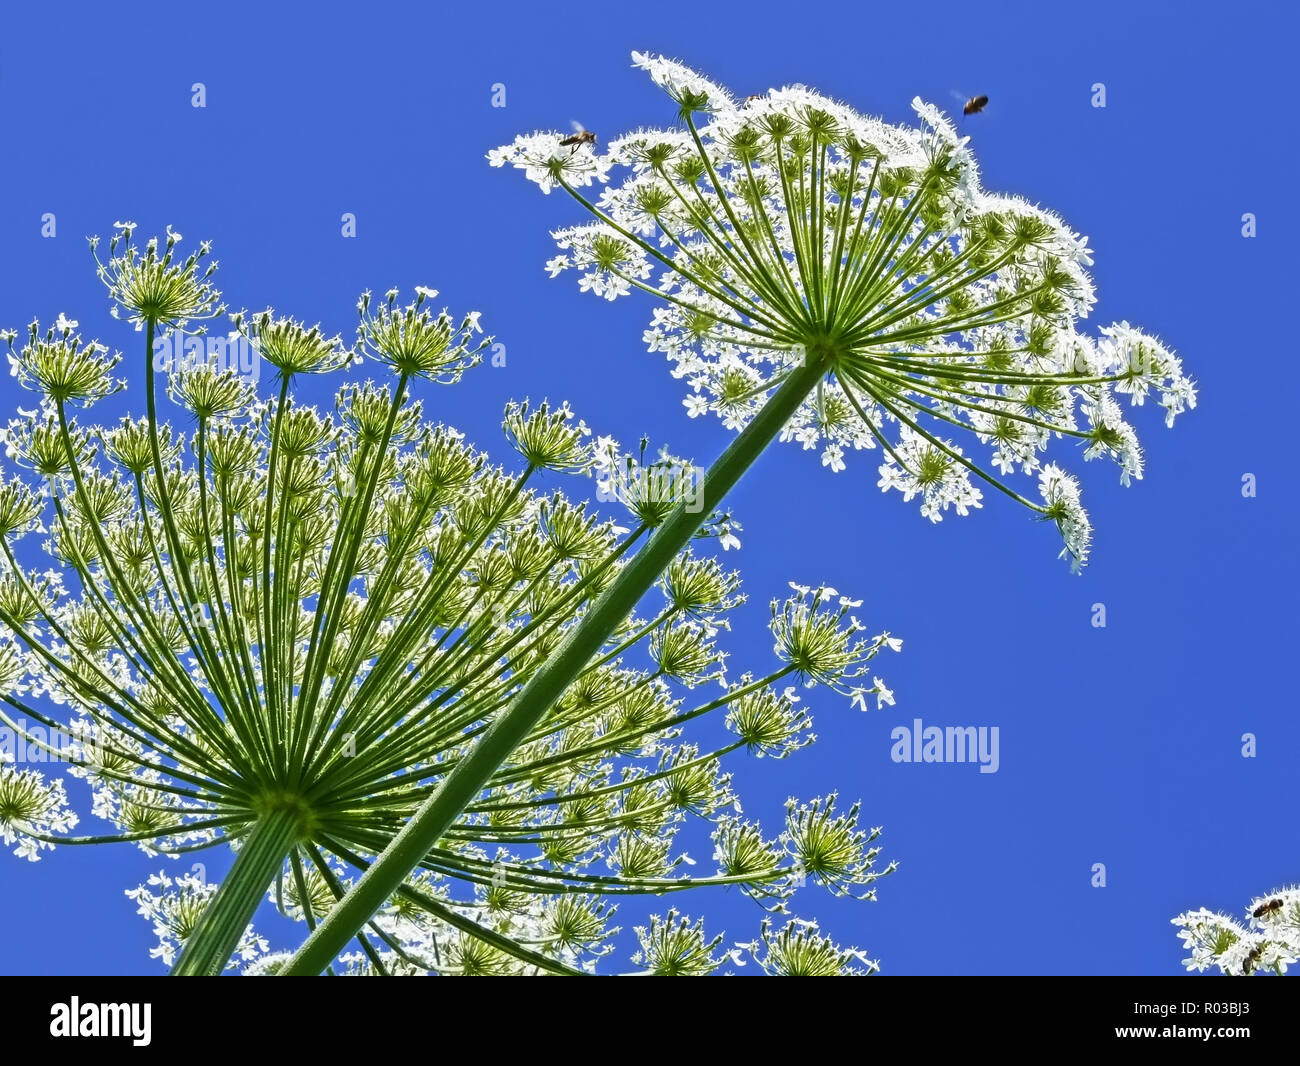 Giant inflorescences of Hogweed plant against blue sky. Latin name: heracleum sphondyl Stock Photo